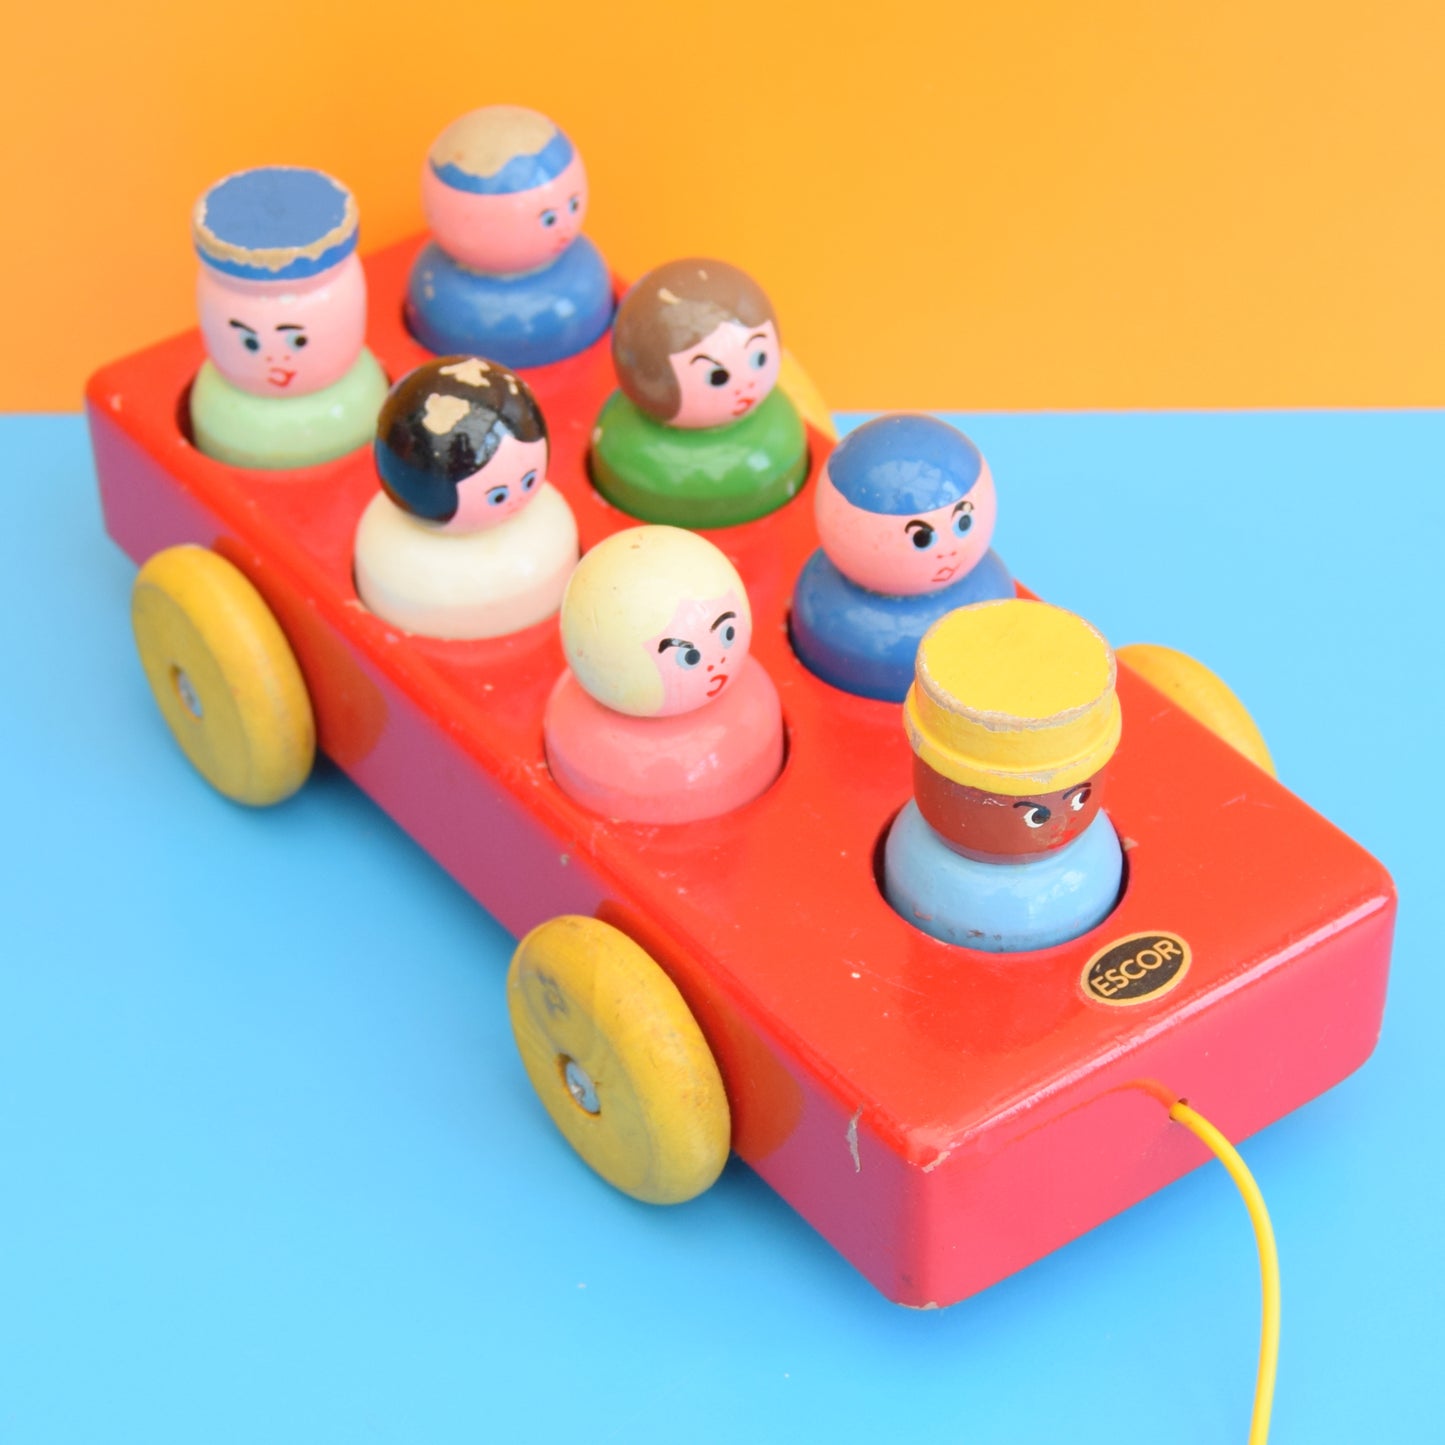 Vintage 1960s Wooden Car Toy With People - Escor